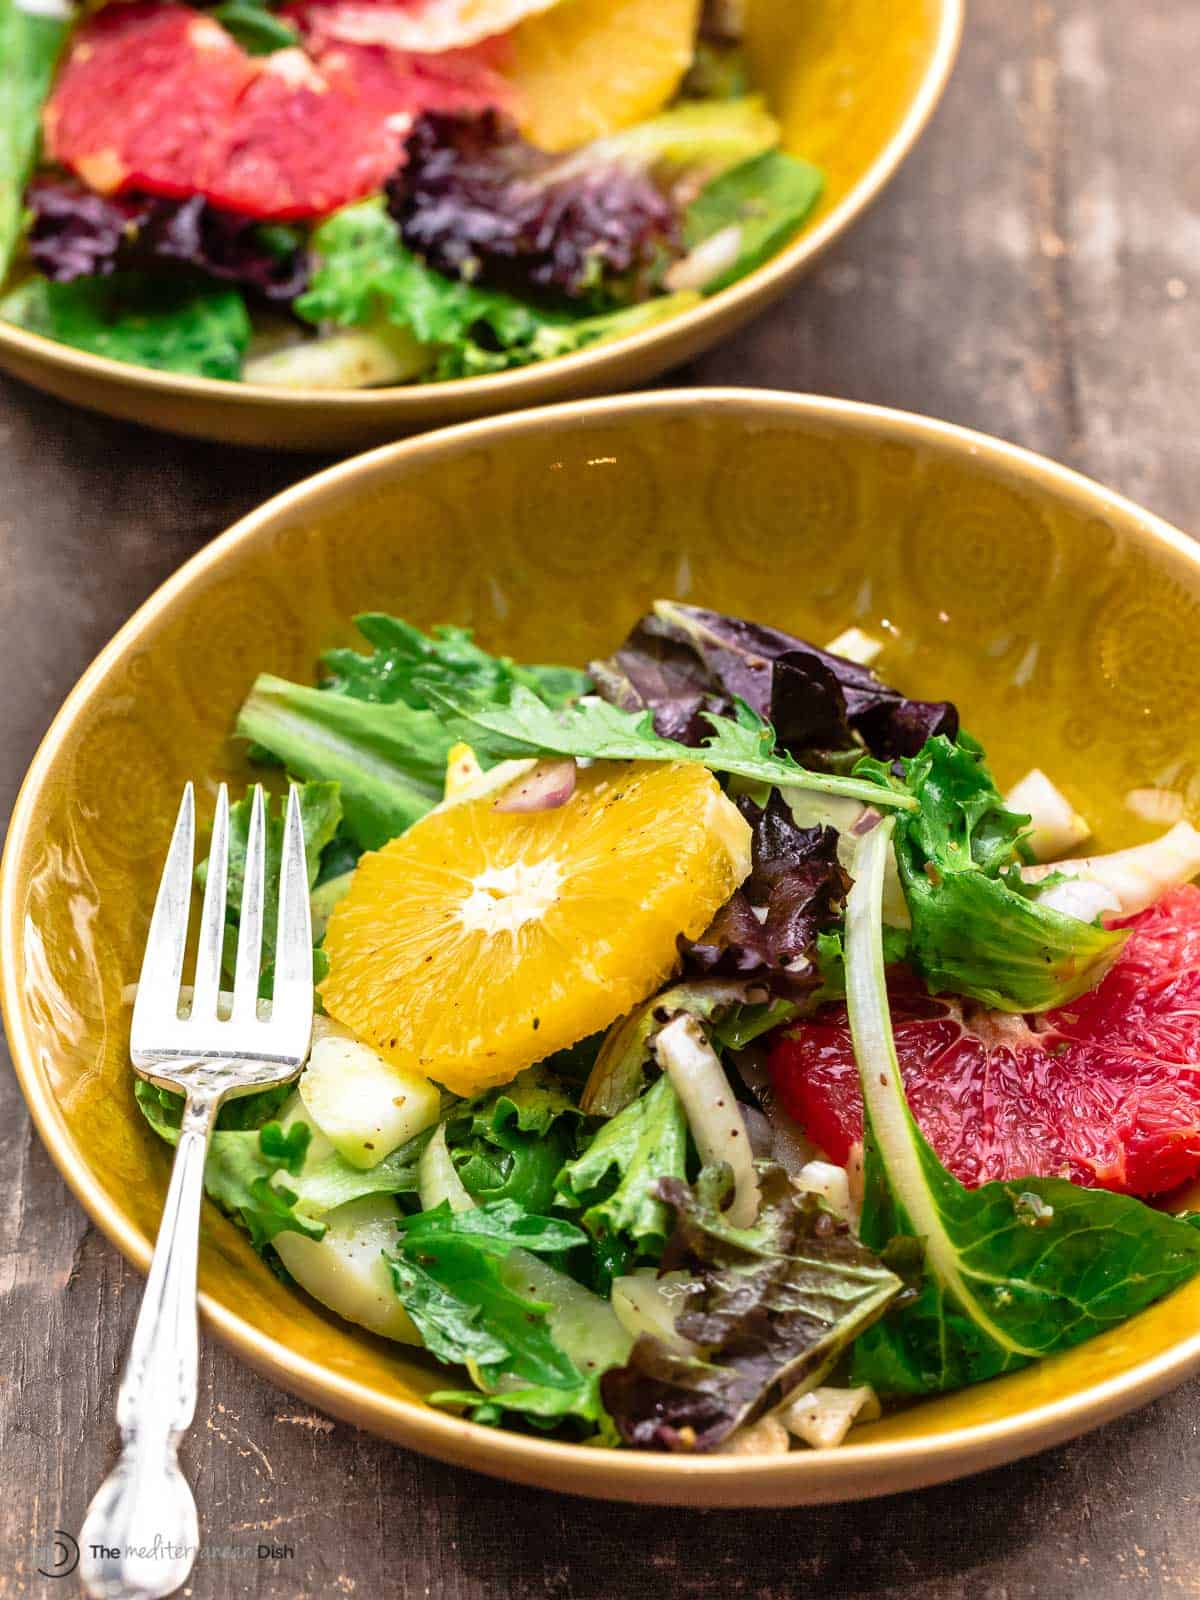 citrus salad in a yellow bowl with a fork